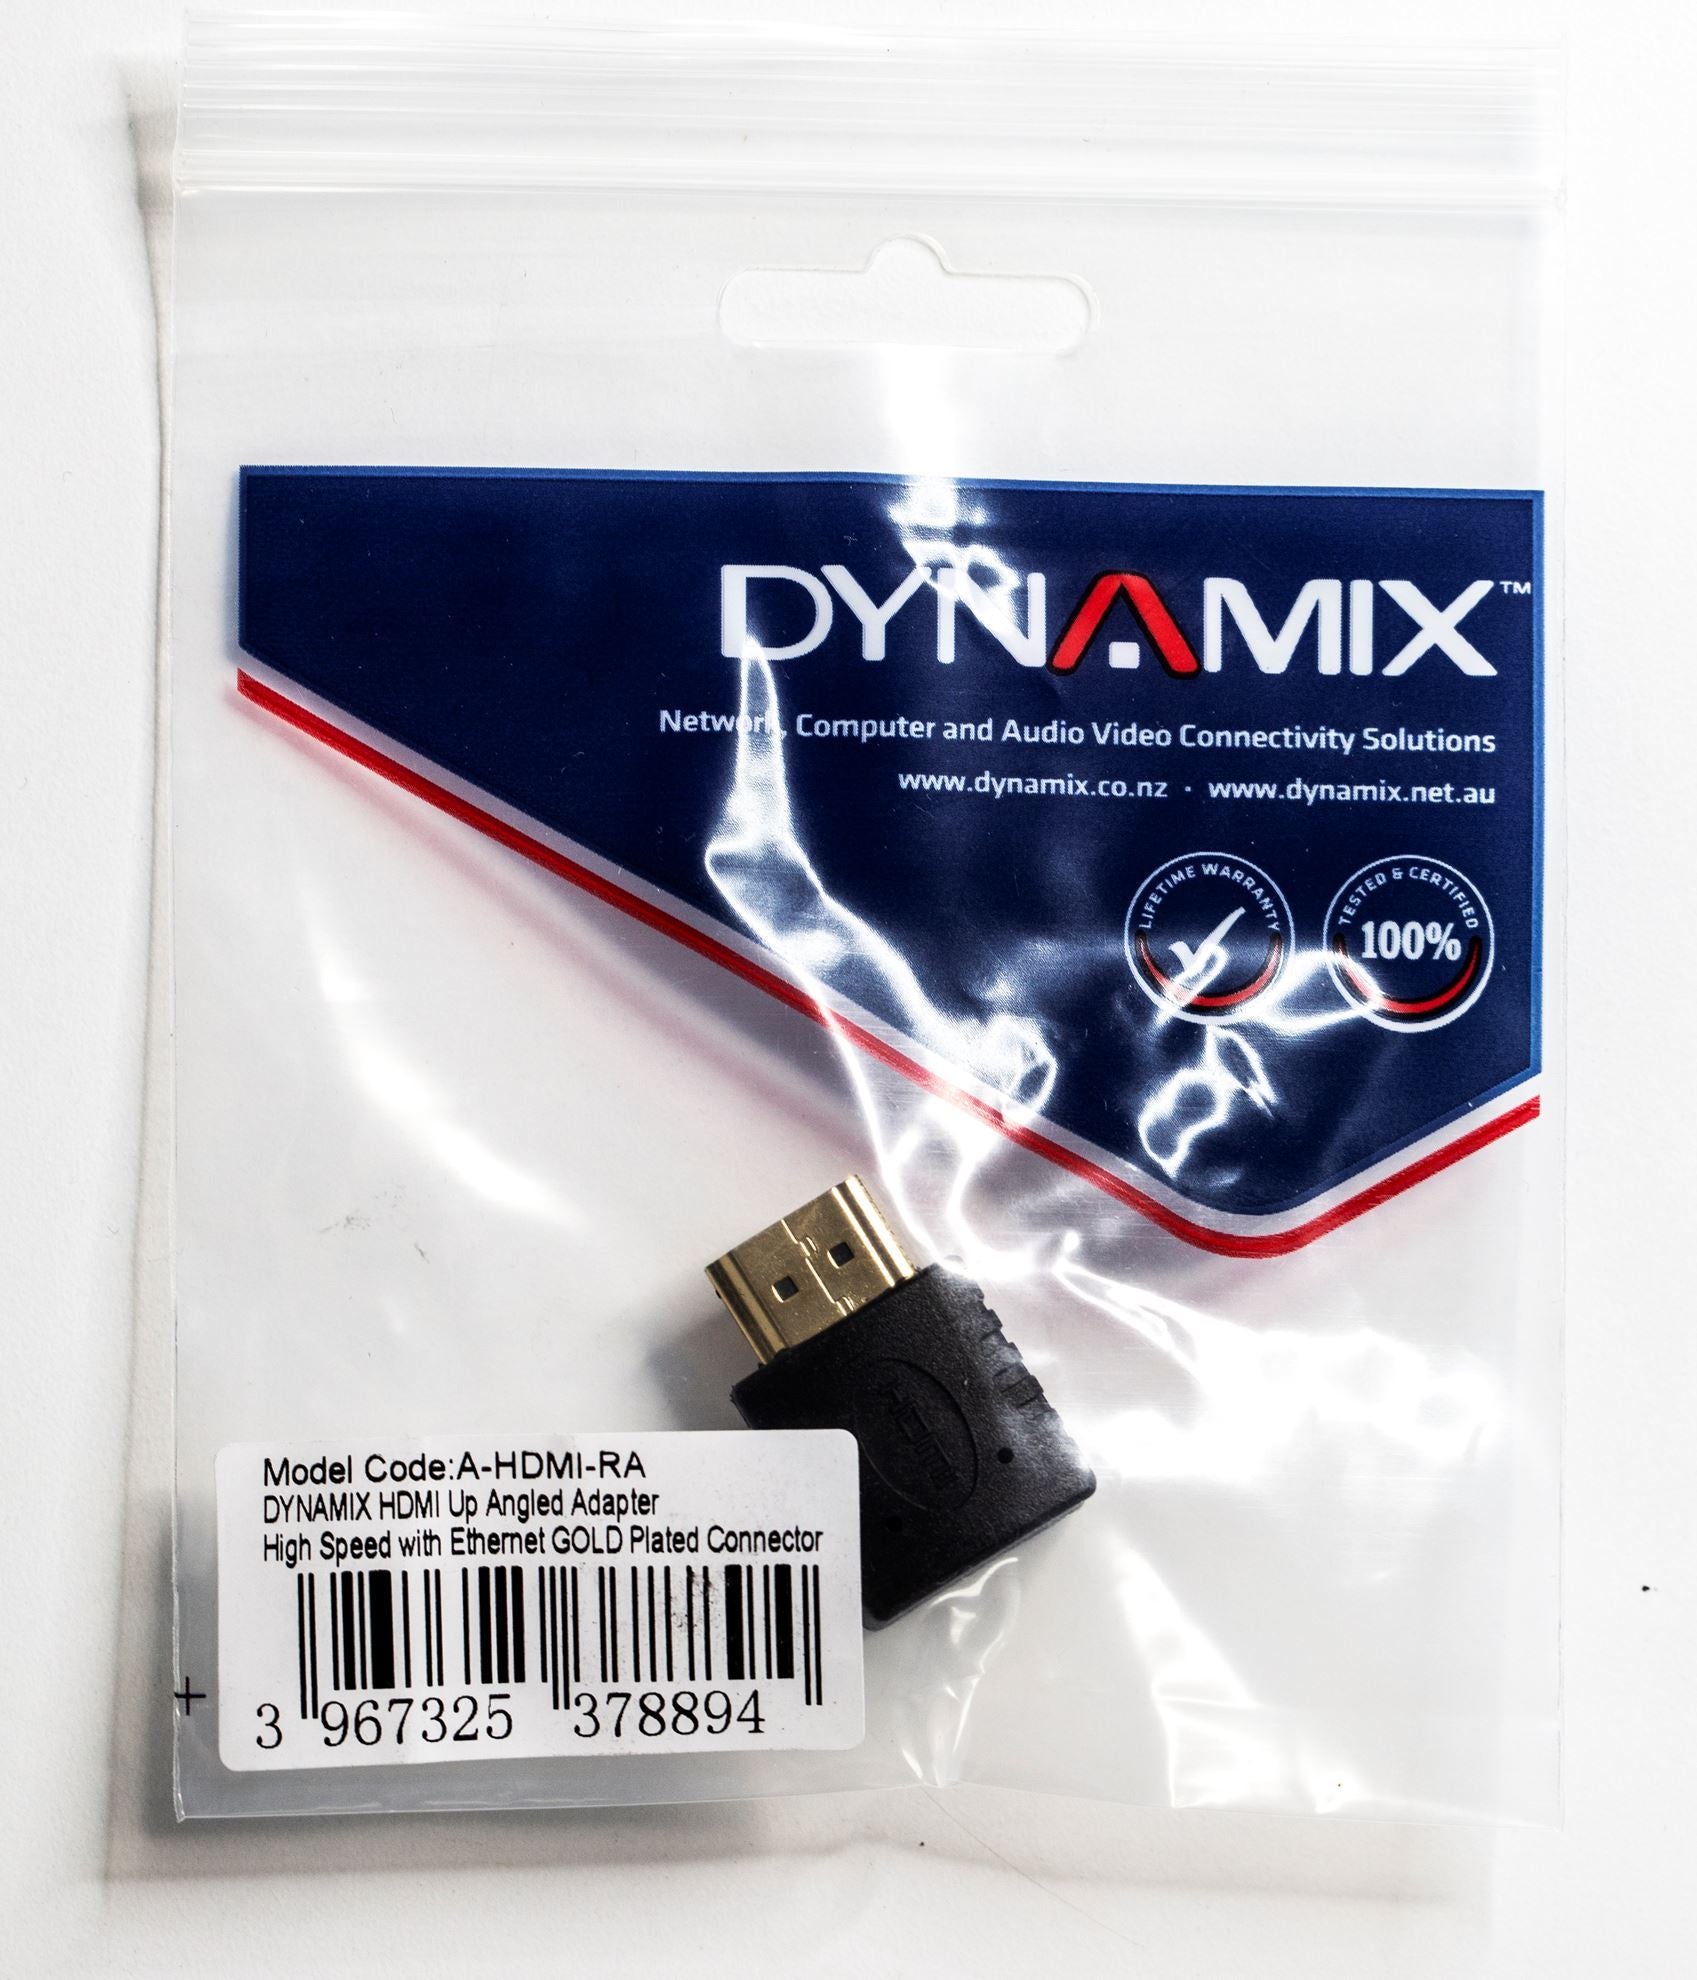 DYNAMIX_HDMI_Up_Angled_Adapter_High-Speed_with_Ethernet_Gold_Plated_Connectors 80